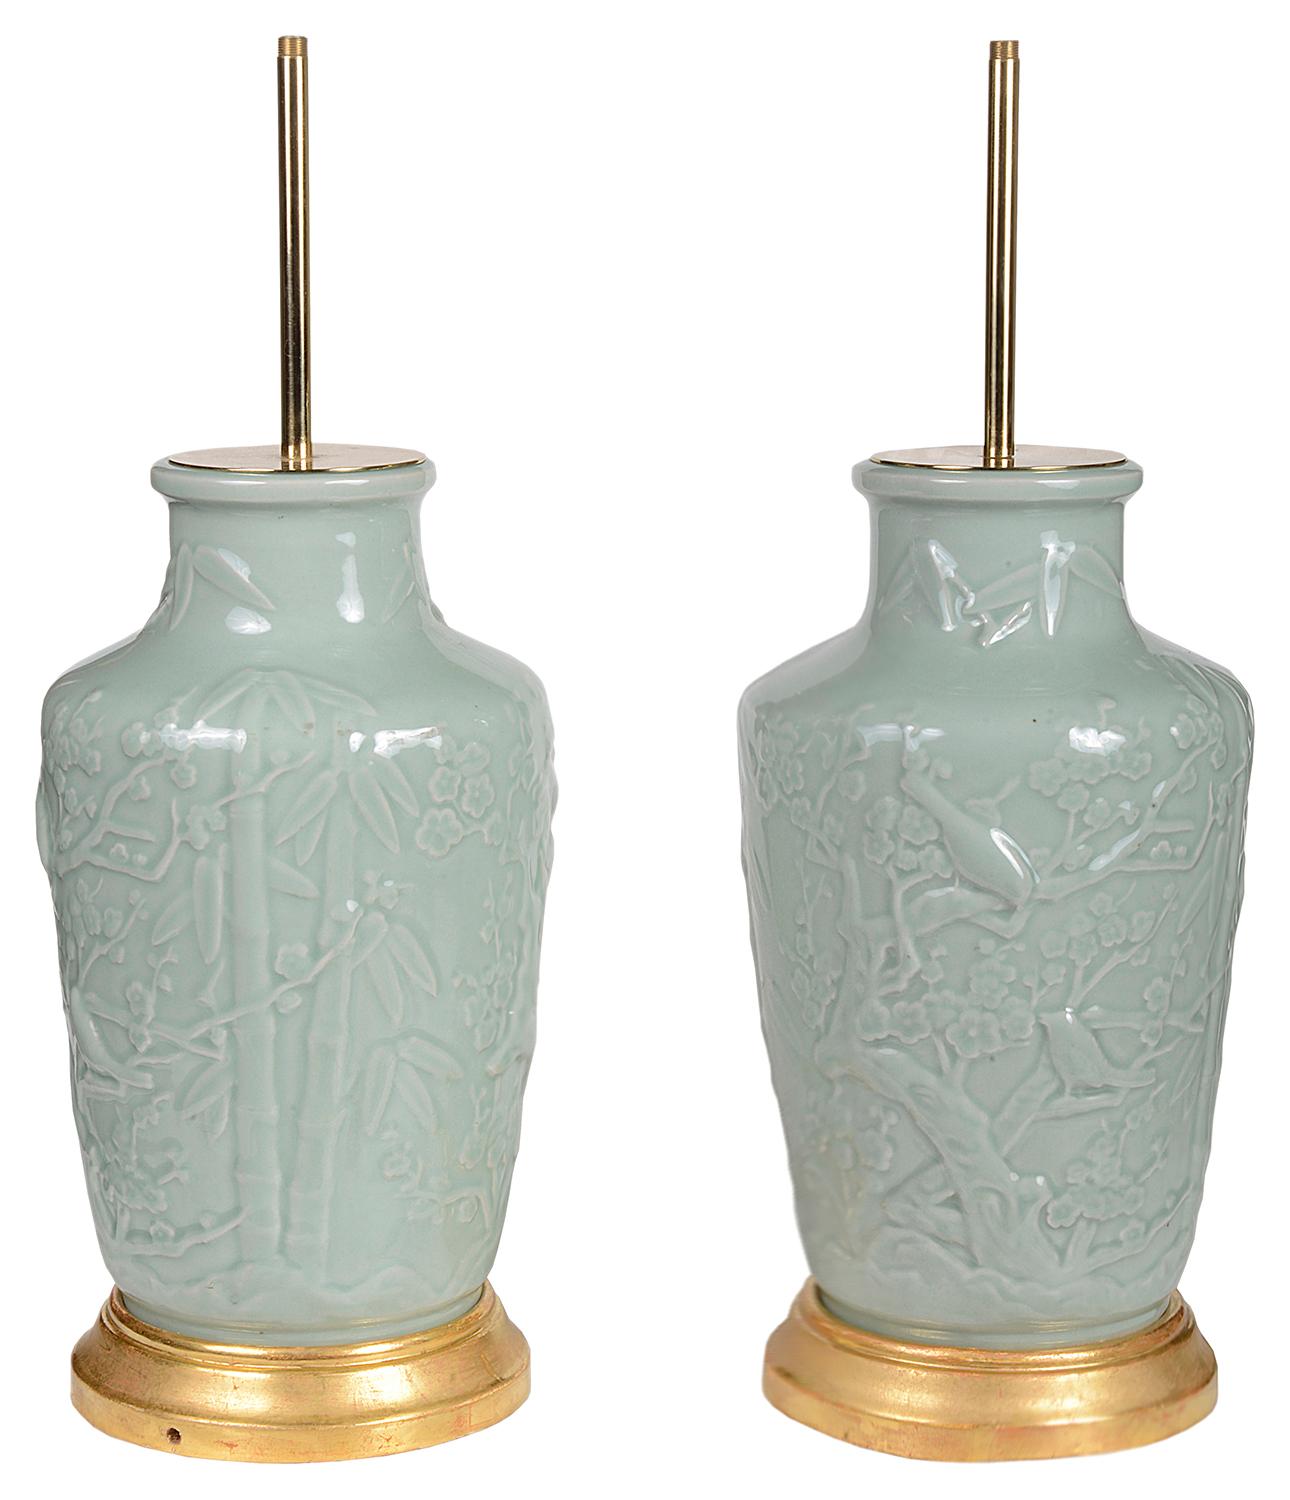 A good quality pair of Chinese Celadon porcelain vases / lamps, each with raised decoration depicting birds and blossom trees. Mounted on gilded wooden bases.